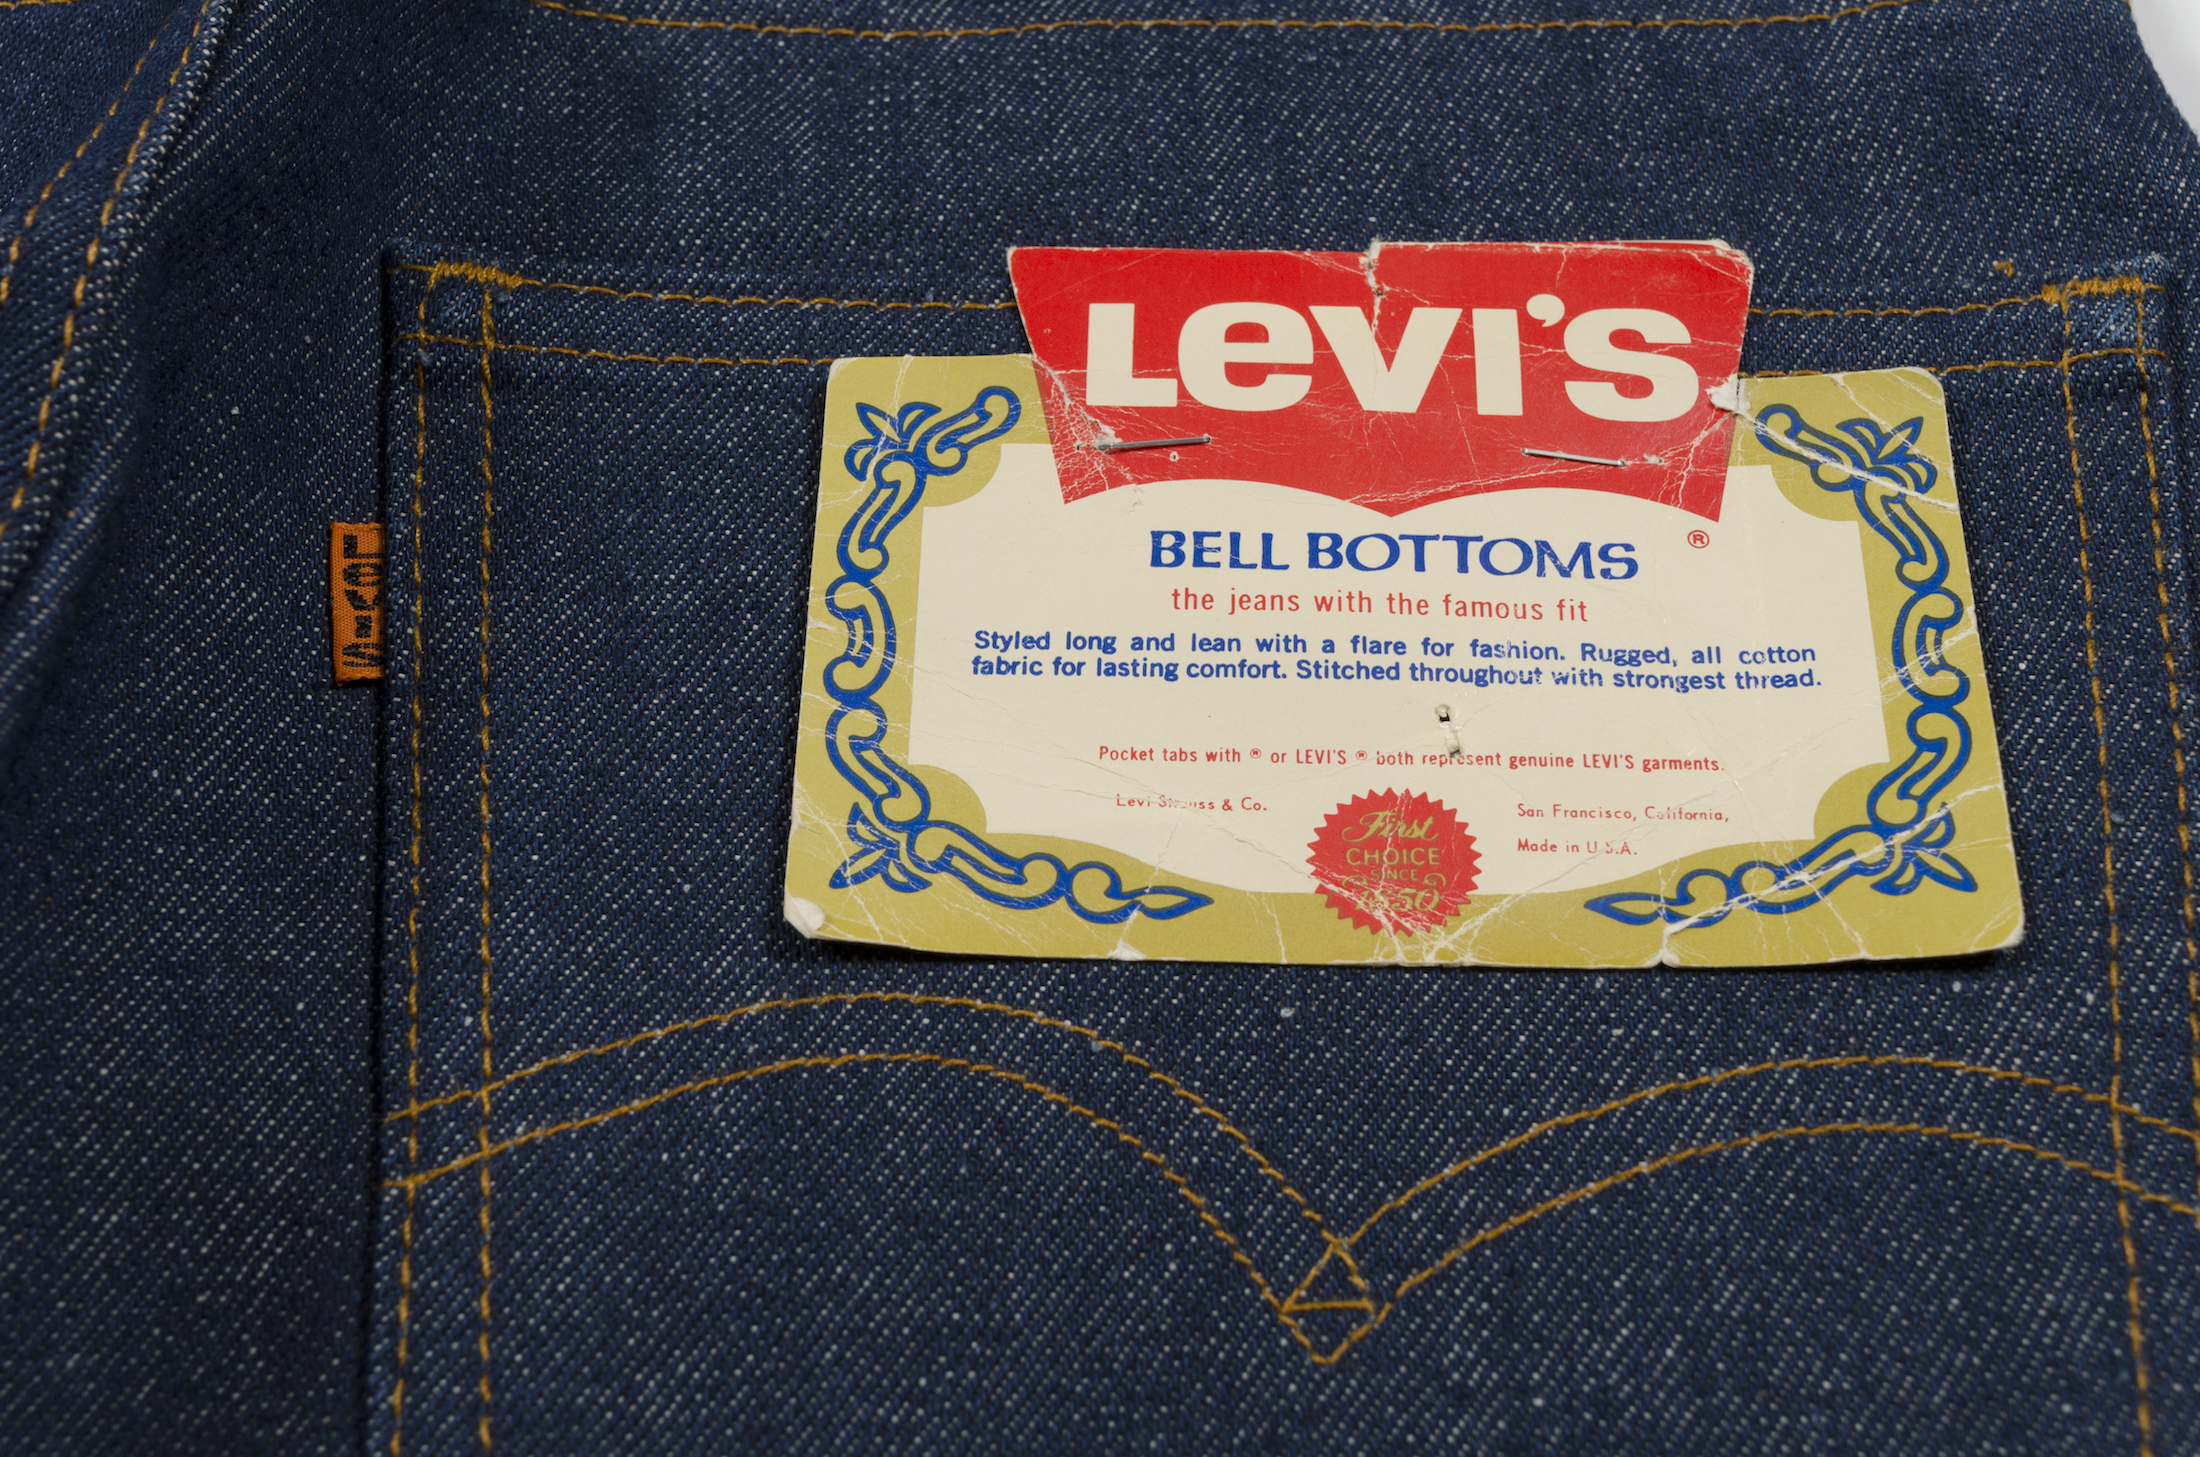 Peace, Love & Bell Bottoms: Celebrating 50 Years of an Iconic